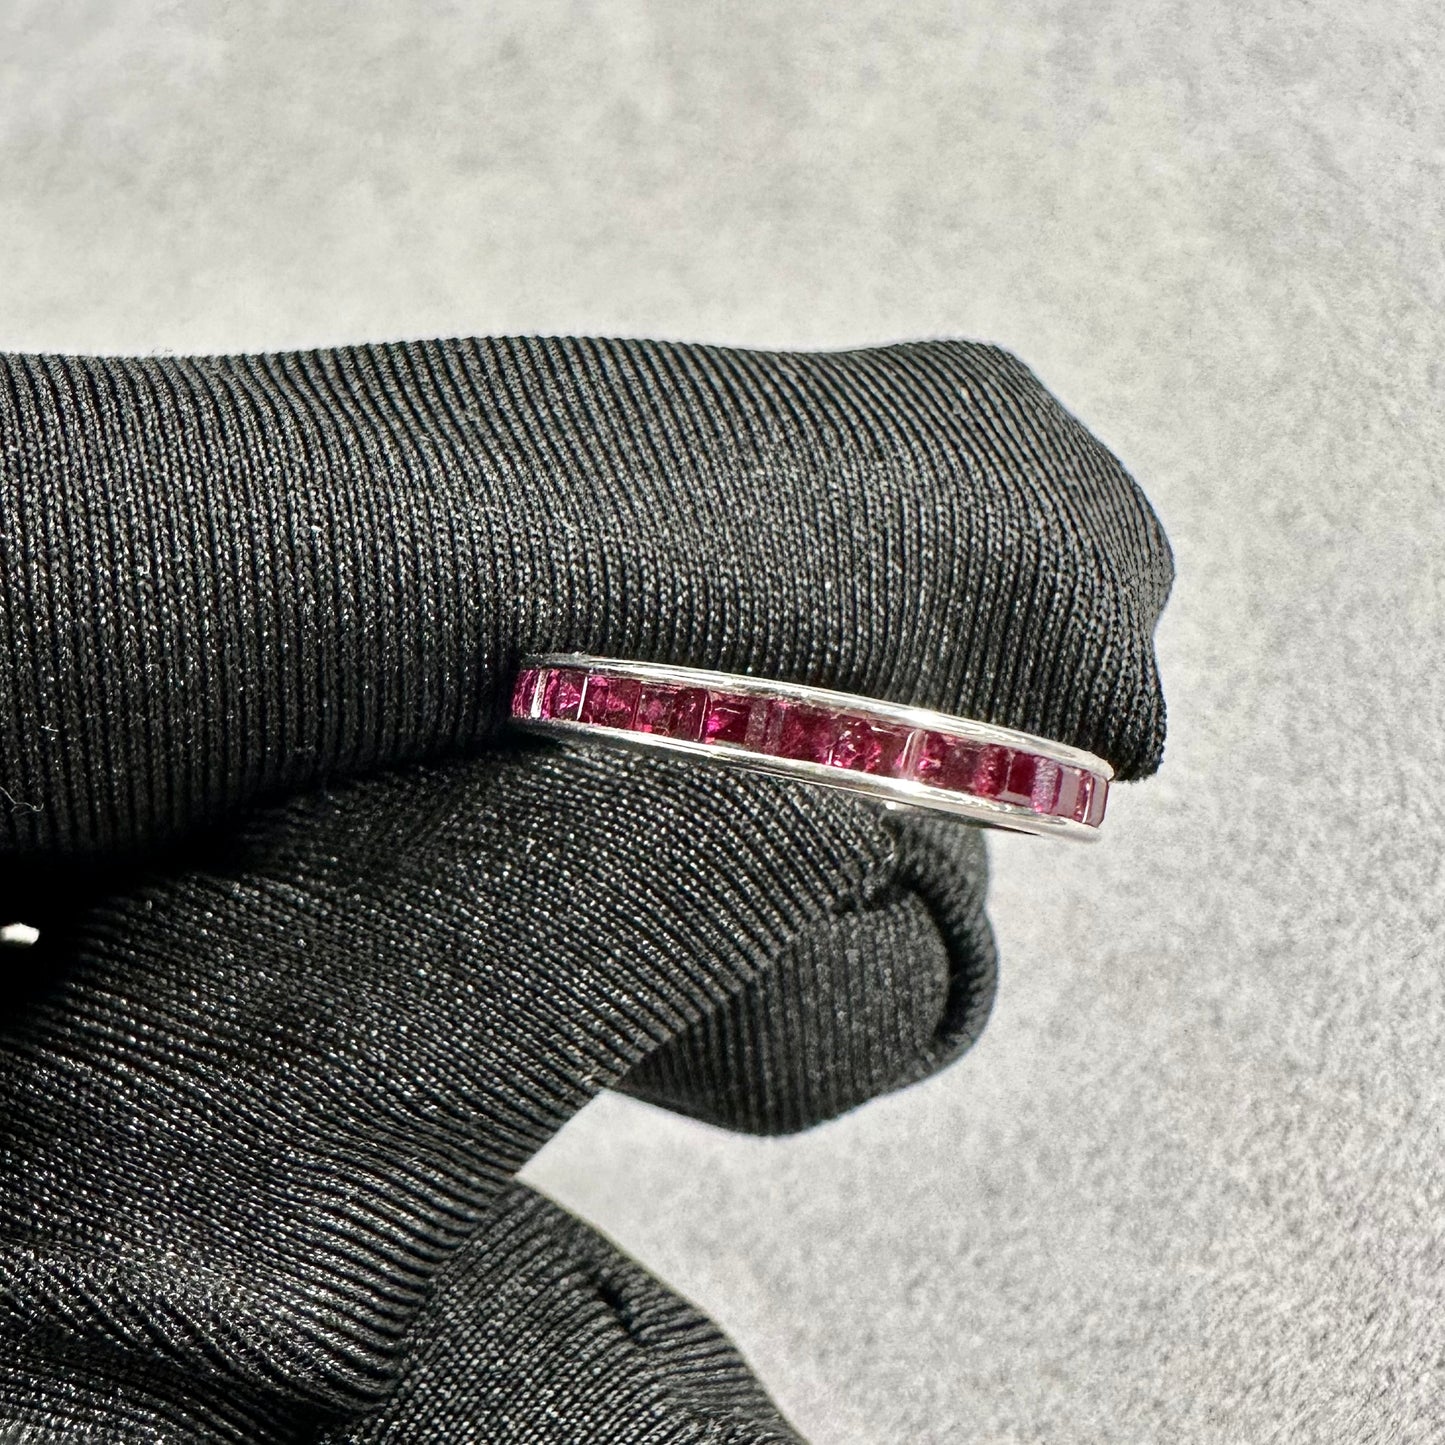 Asscher Cut Vivid Red Ruby Eternity Band Set in 14kt White Gold